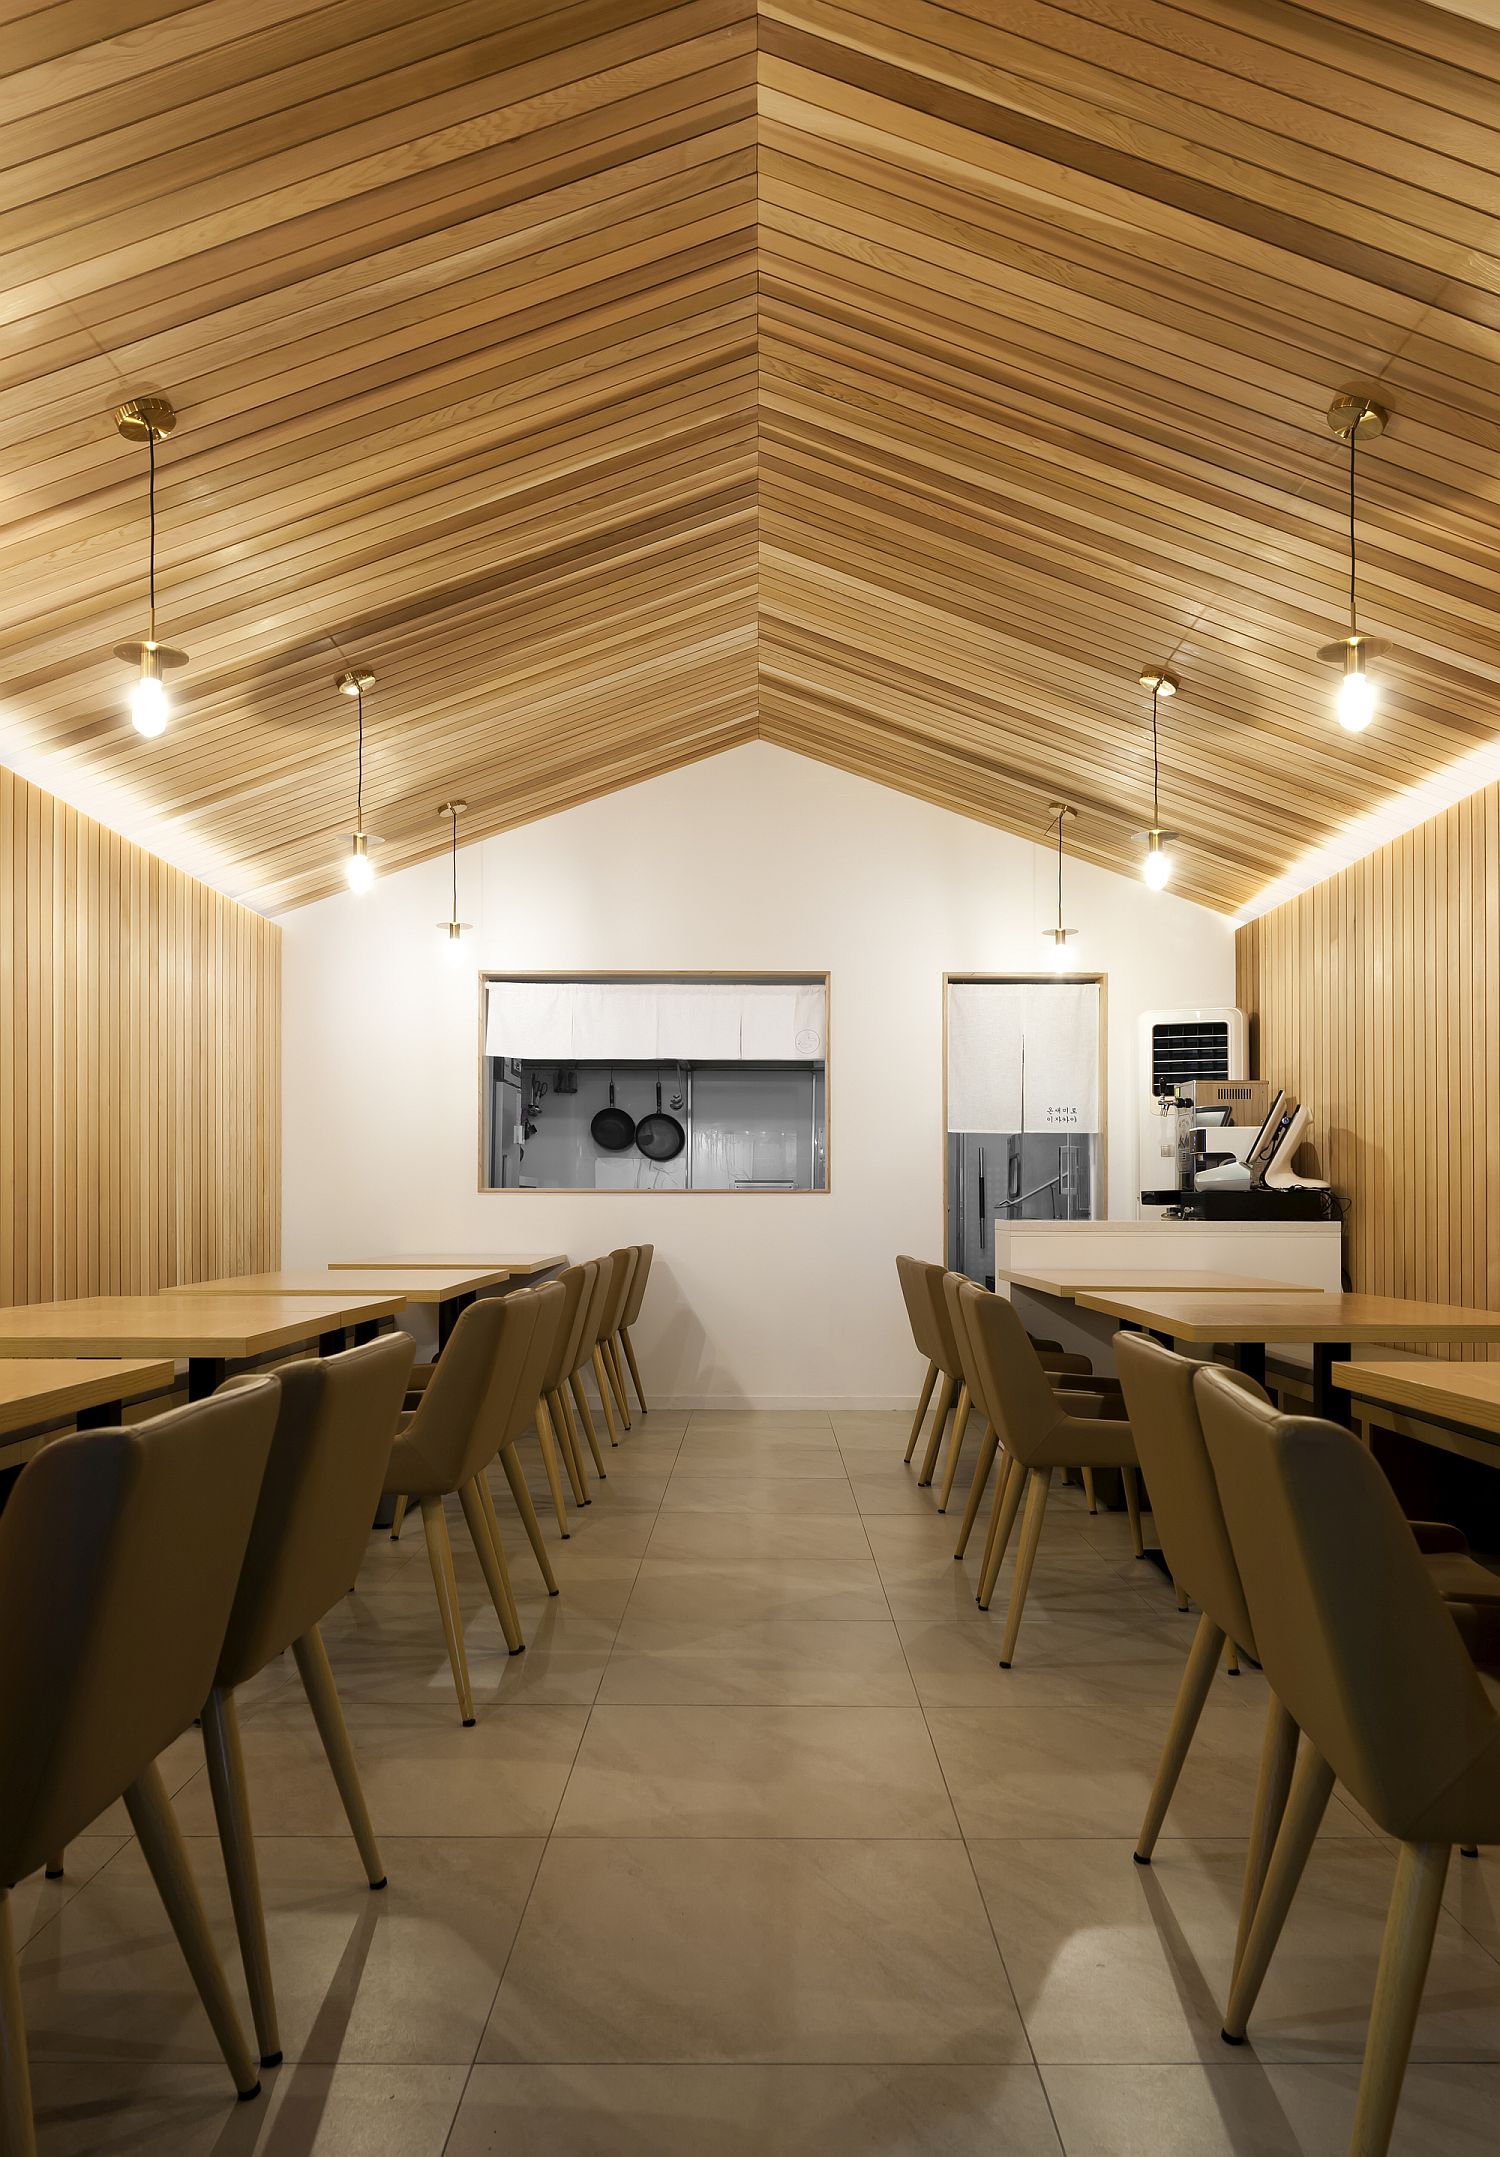 Gabled roof form creates more space visually inside the restaurant